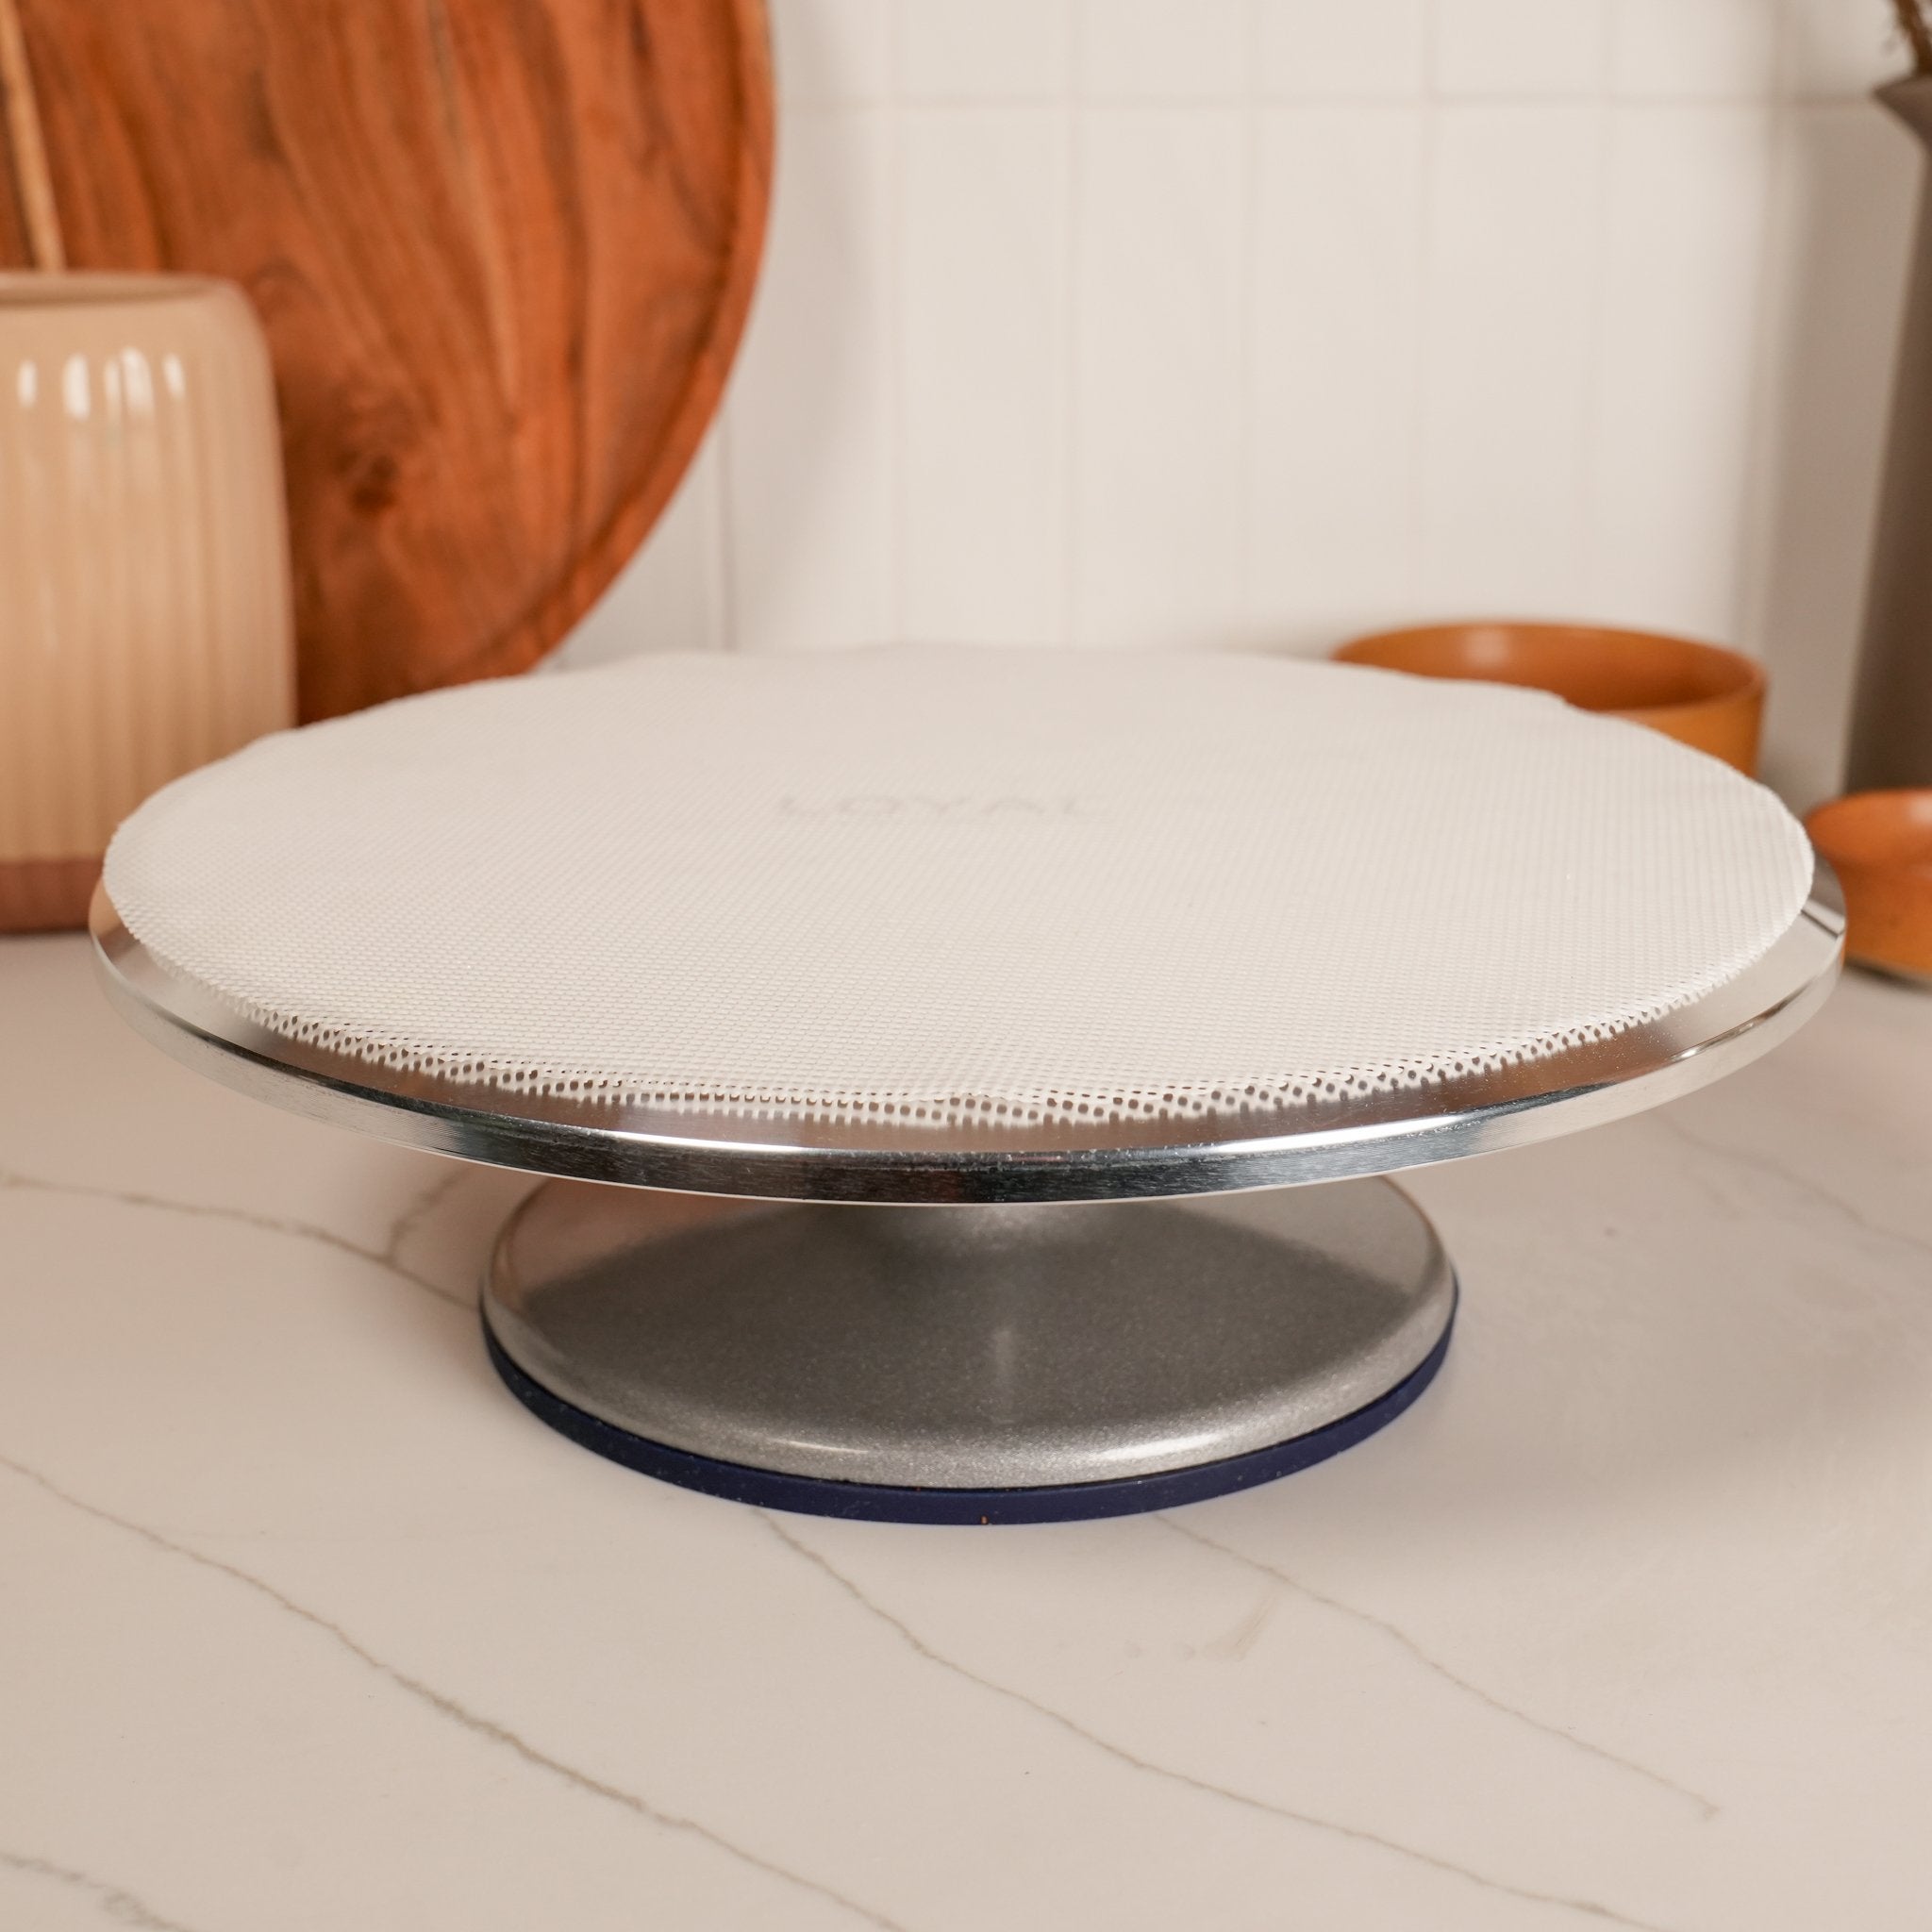 Turntable Cake Stand Loyal 360 Pro Heavy Duty